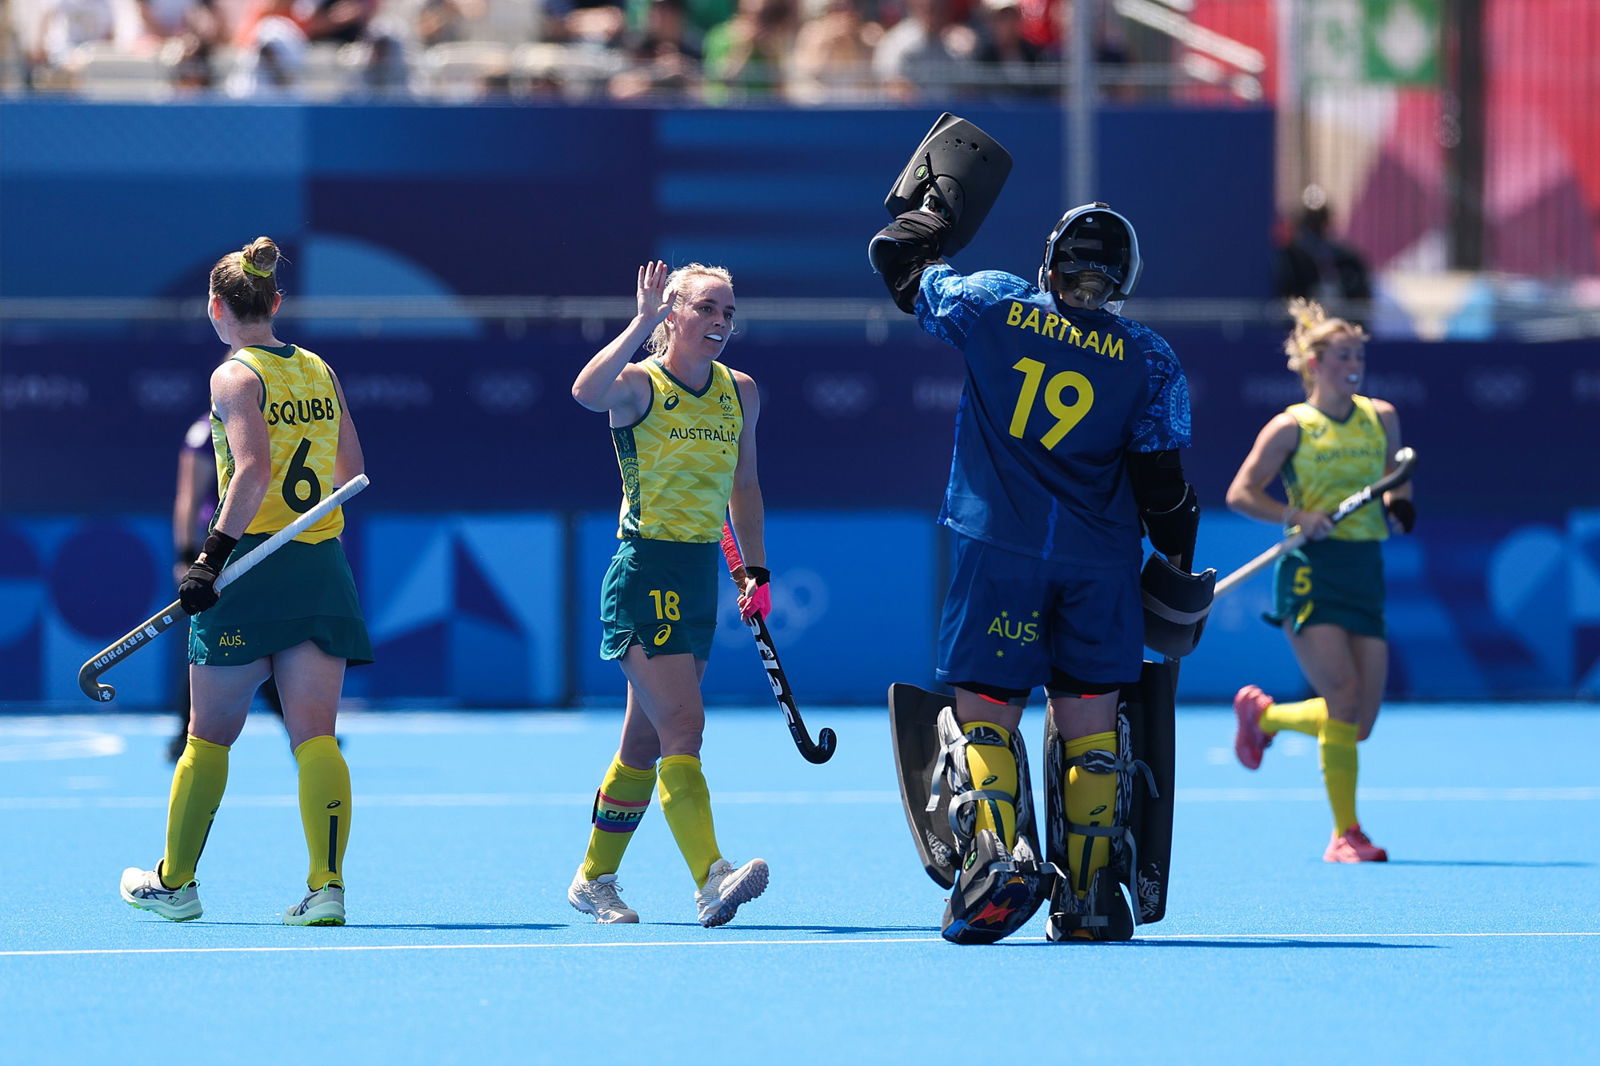 The Hockeyroos' Jane Claxton high-fives teammate Jocelyn Bartram at the Olympics